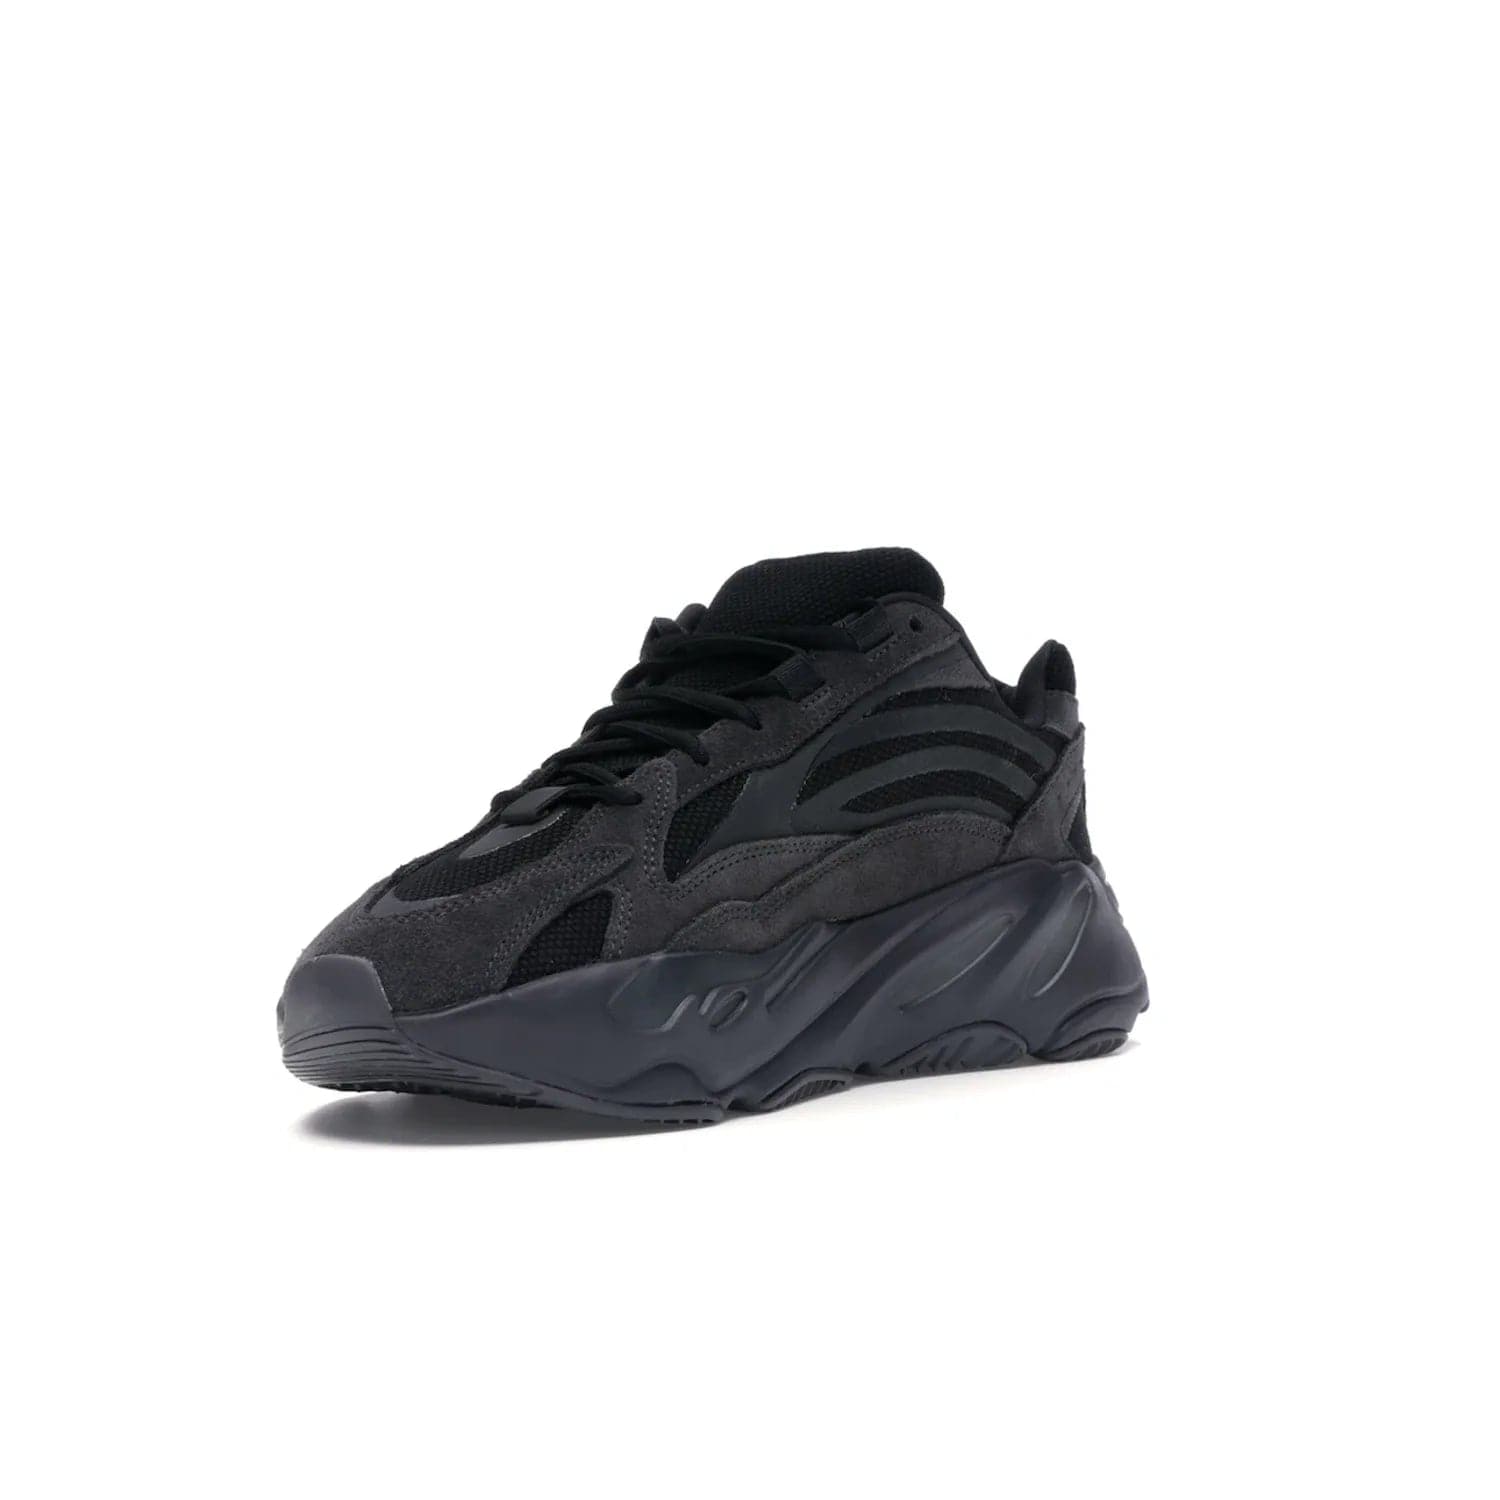 adidas Yeezy Boost 700 V2 Vanta - Image 14 - Only at www.BallersClubKickz.com - Introducing the adidas Yeezy Boost 700 V2 Vanta - a sleek and stylish all-black design featuring a combination of mesh, leather, and suede construction with signature Boost cushioning in the sole. The ultimate in comfort and support.